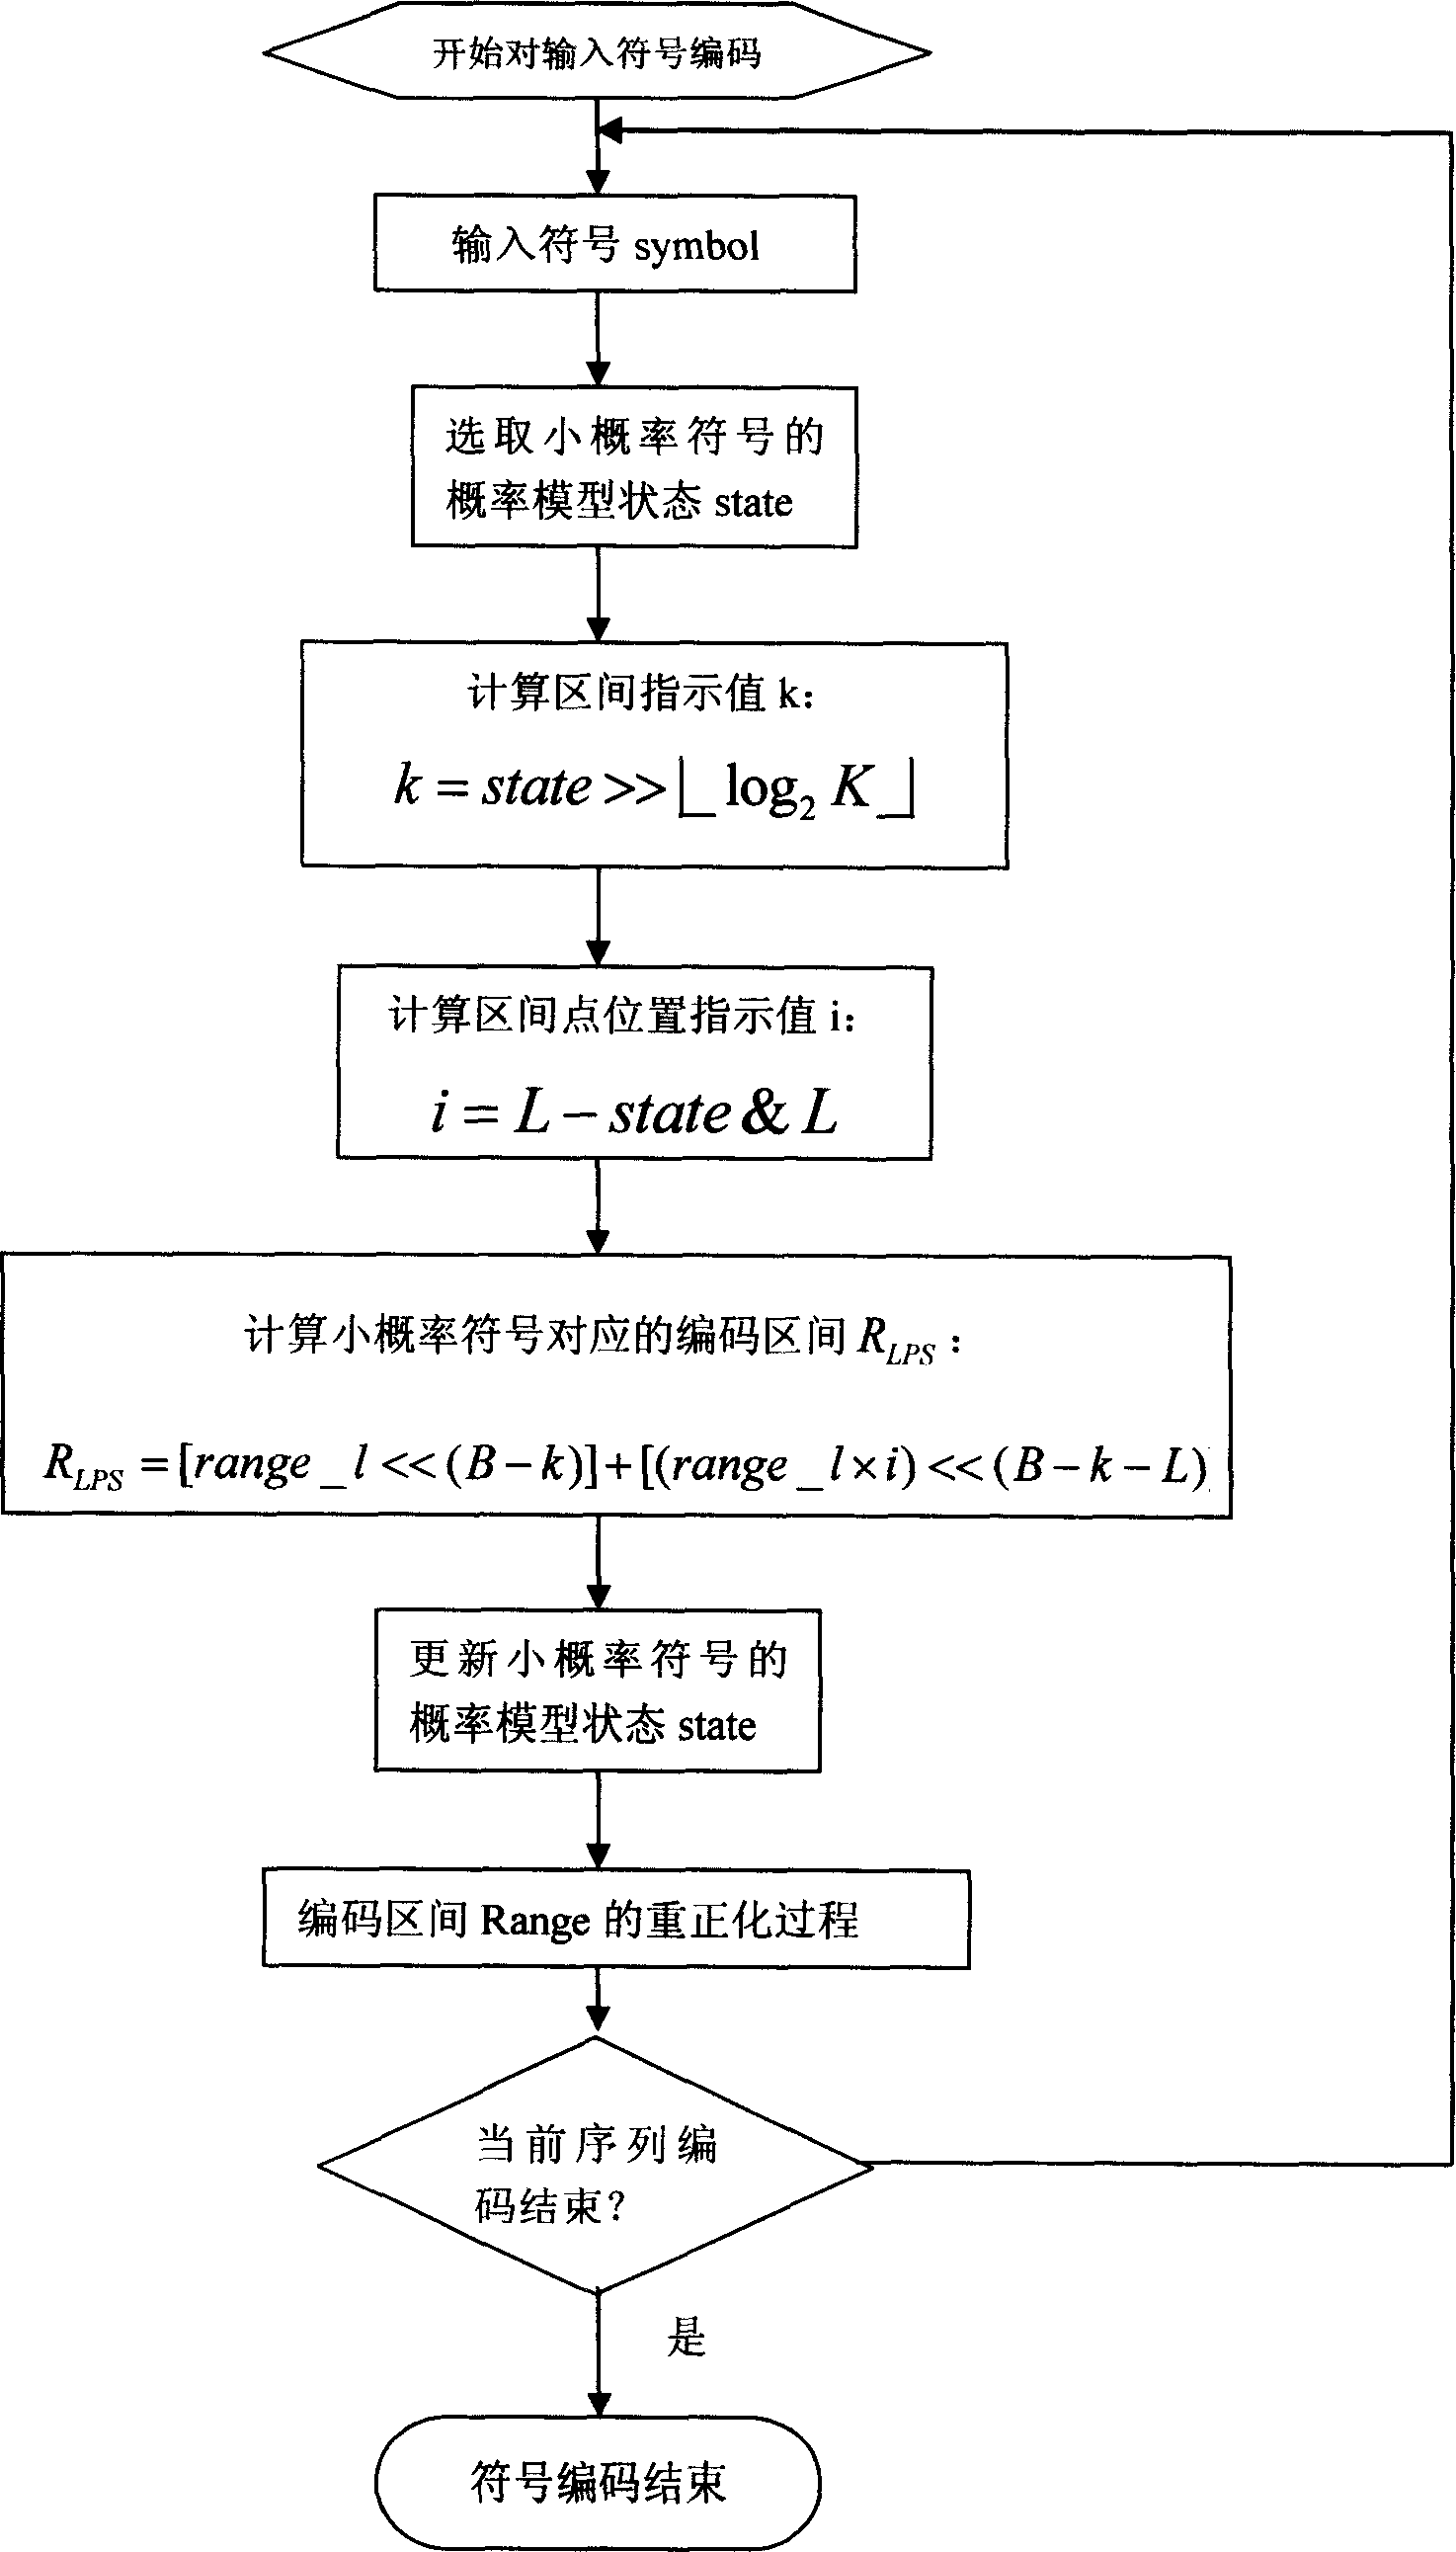 A two-value arithmetic coding method of digital signal